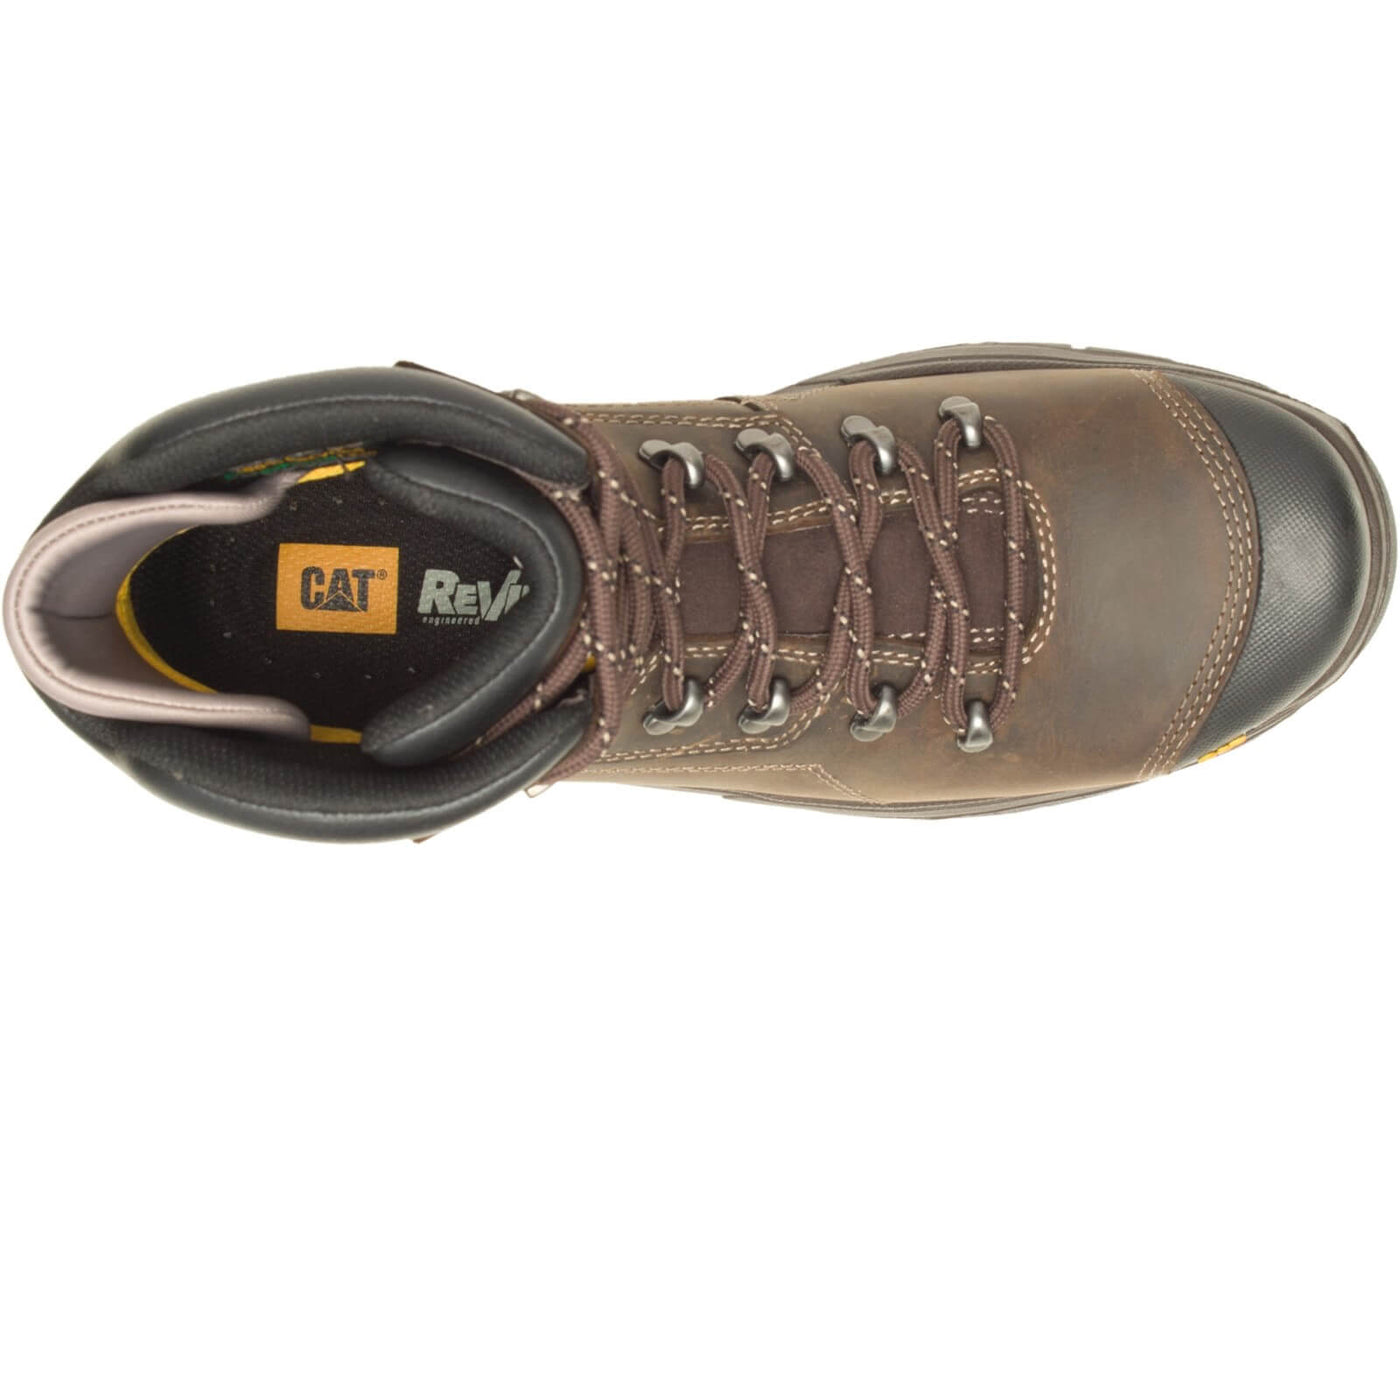 Caterpillar Diagnostic 2.0 Waterproof S3 Safety Boots Brown/Coffee 4#colour_brown-coffee